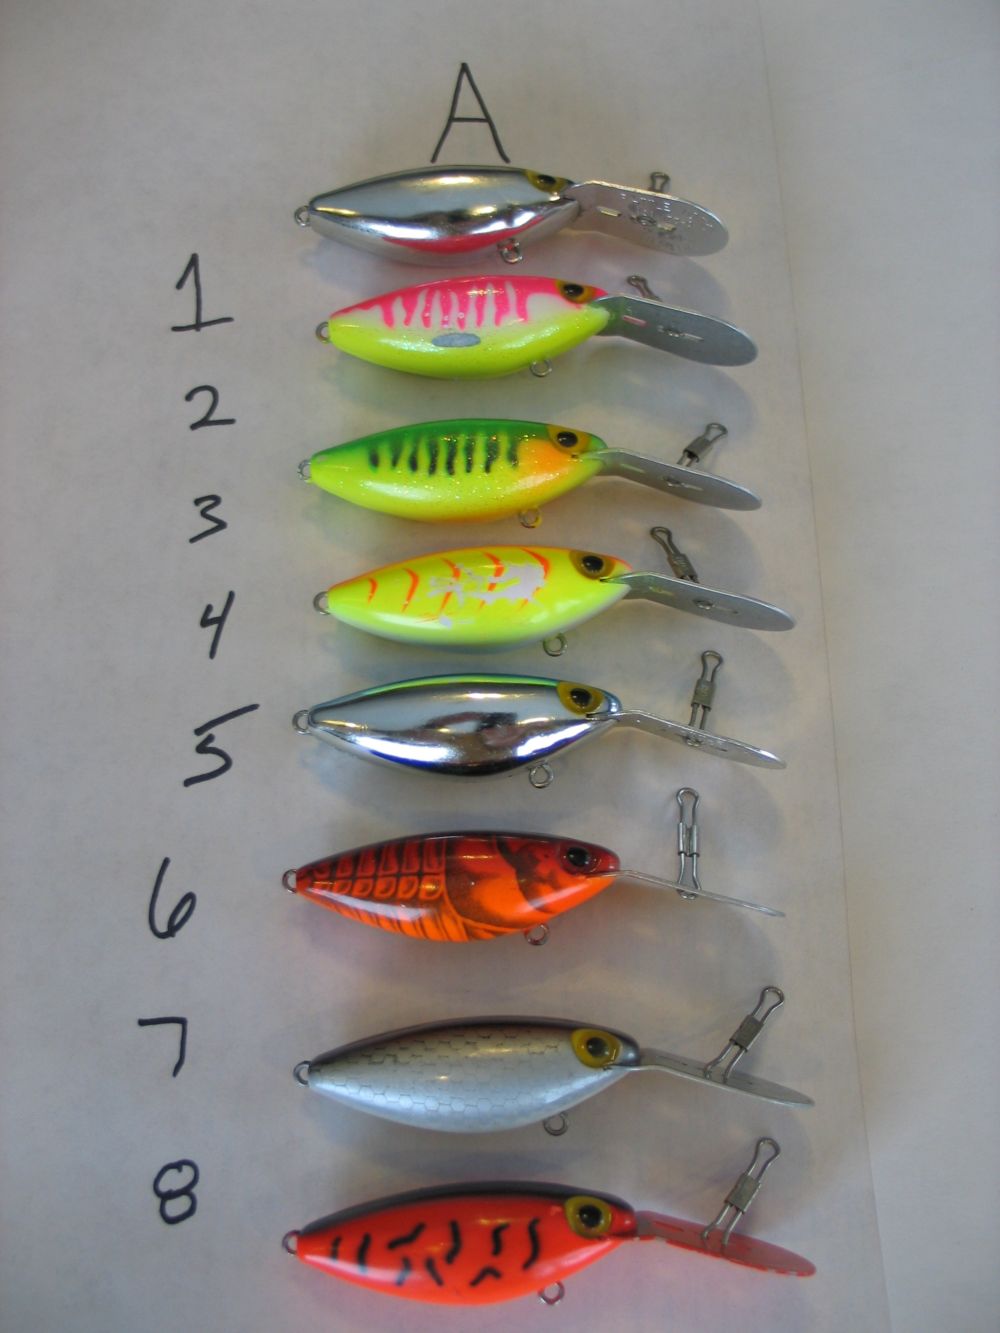 Viewing a thread - F / S Old Storm Baits, Pre - Rapala - Groups 1 to 5